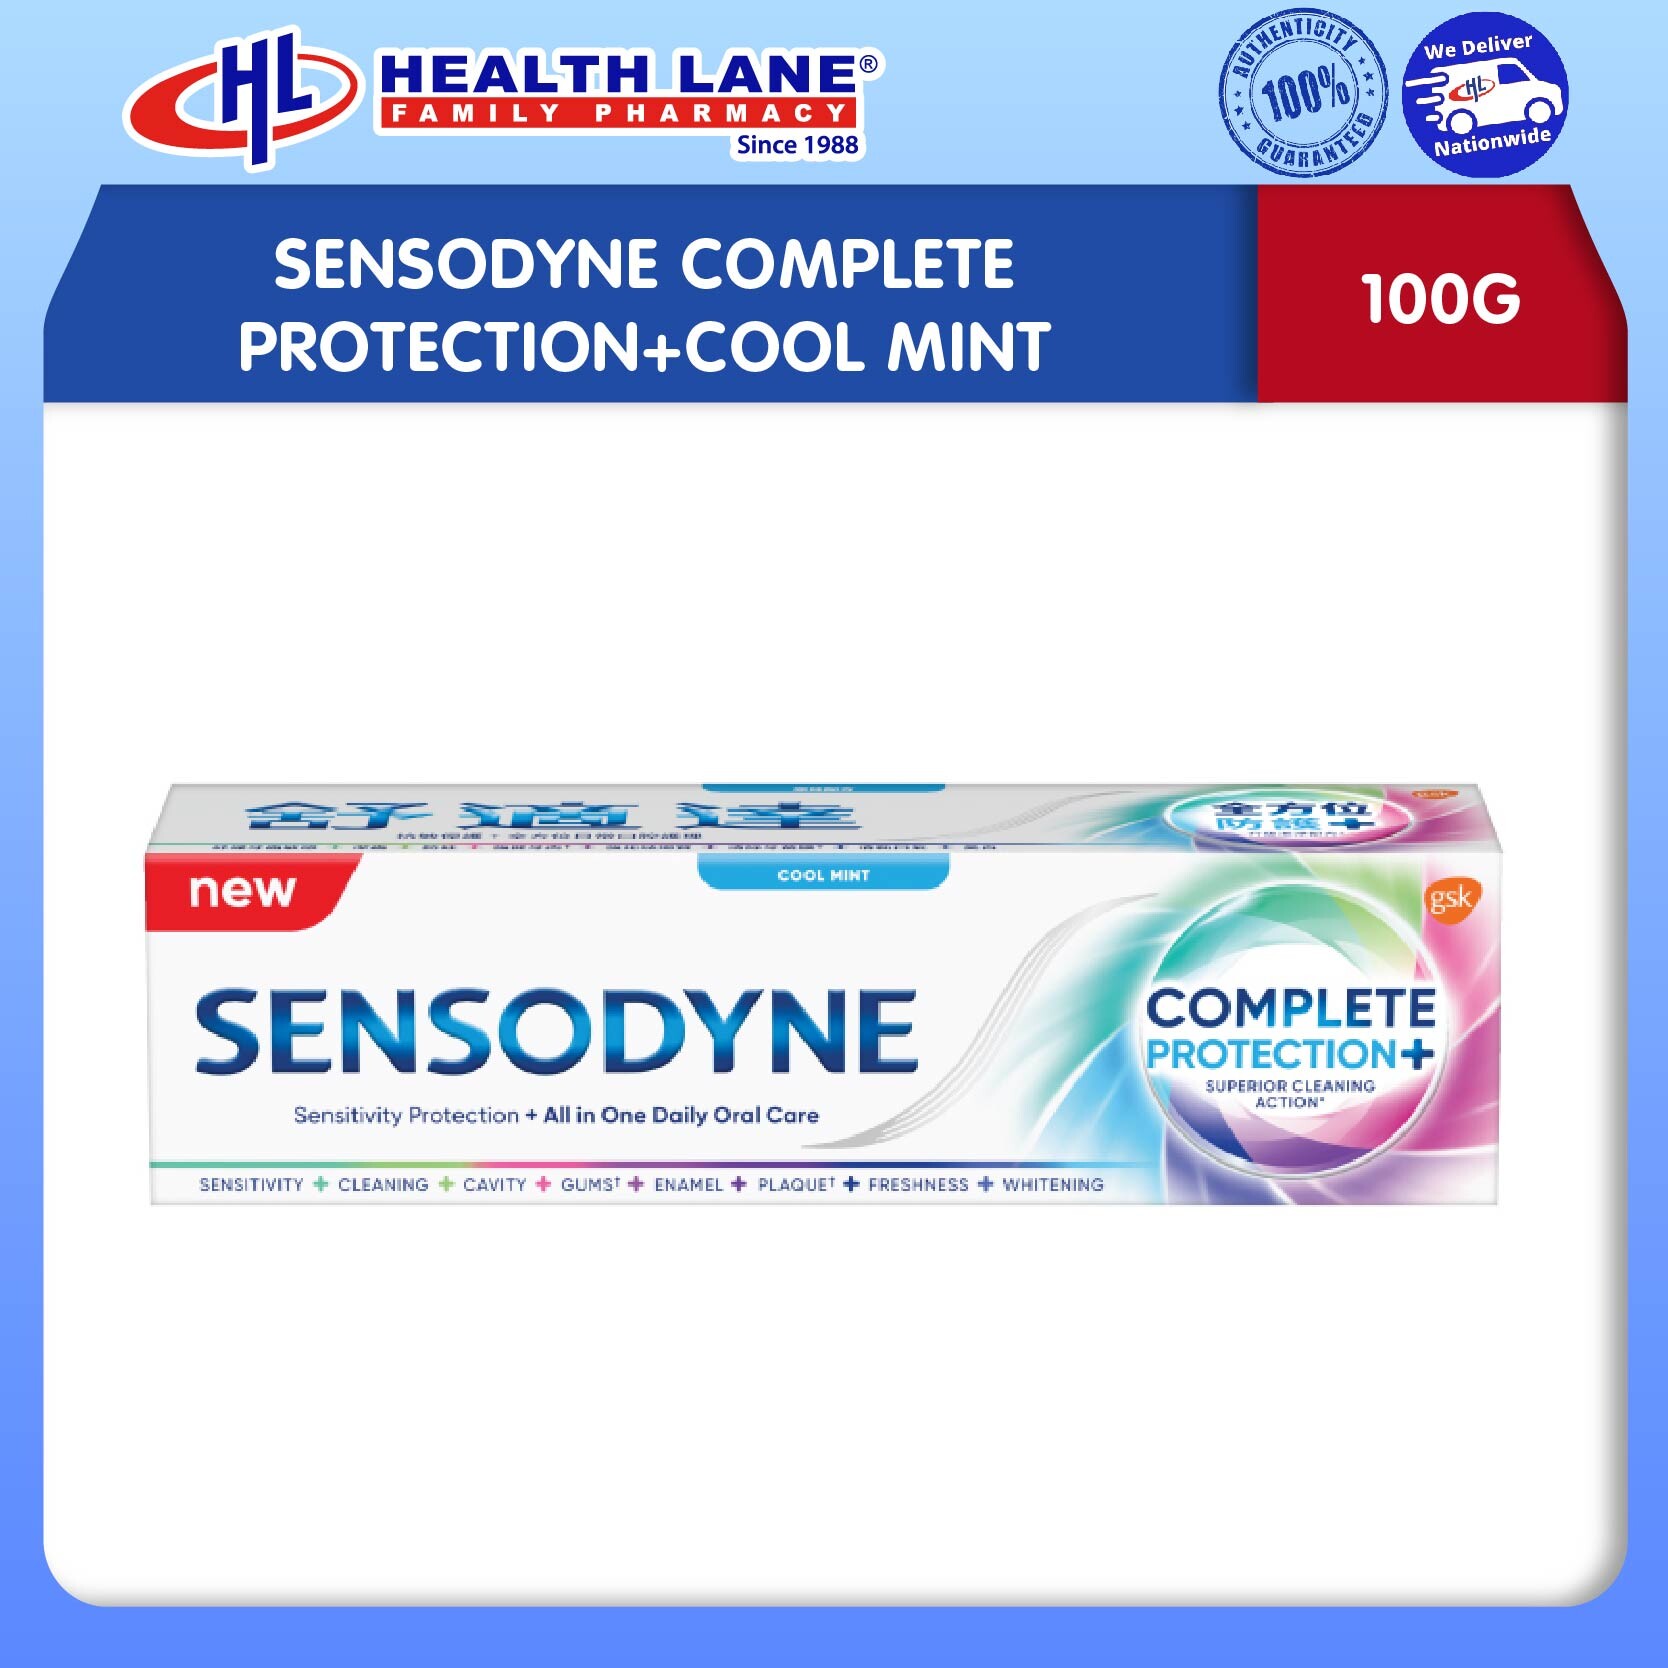 SENSODYNE COMPLETE PROTECTION+COOL MINT (100G)